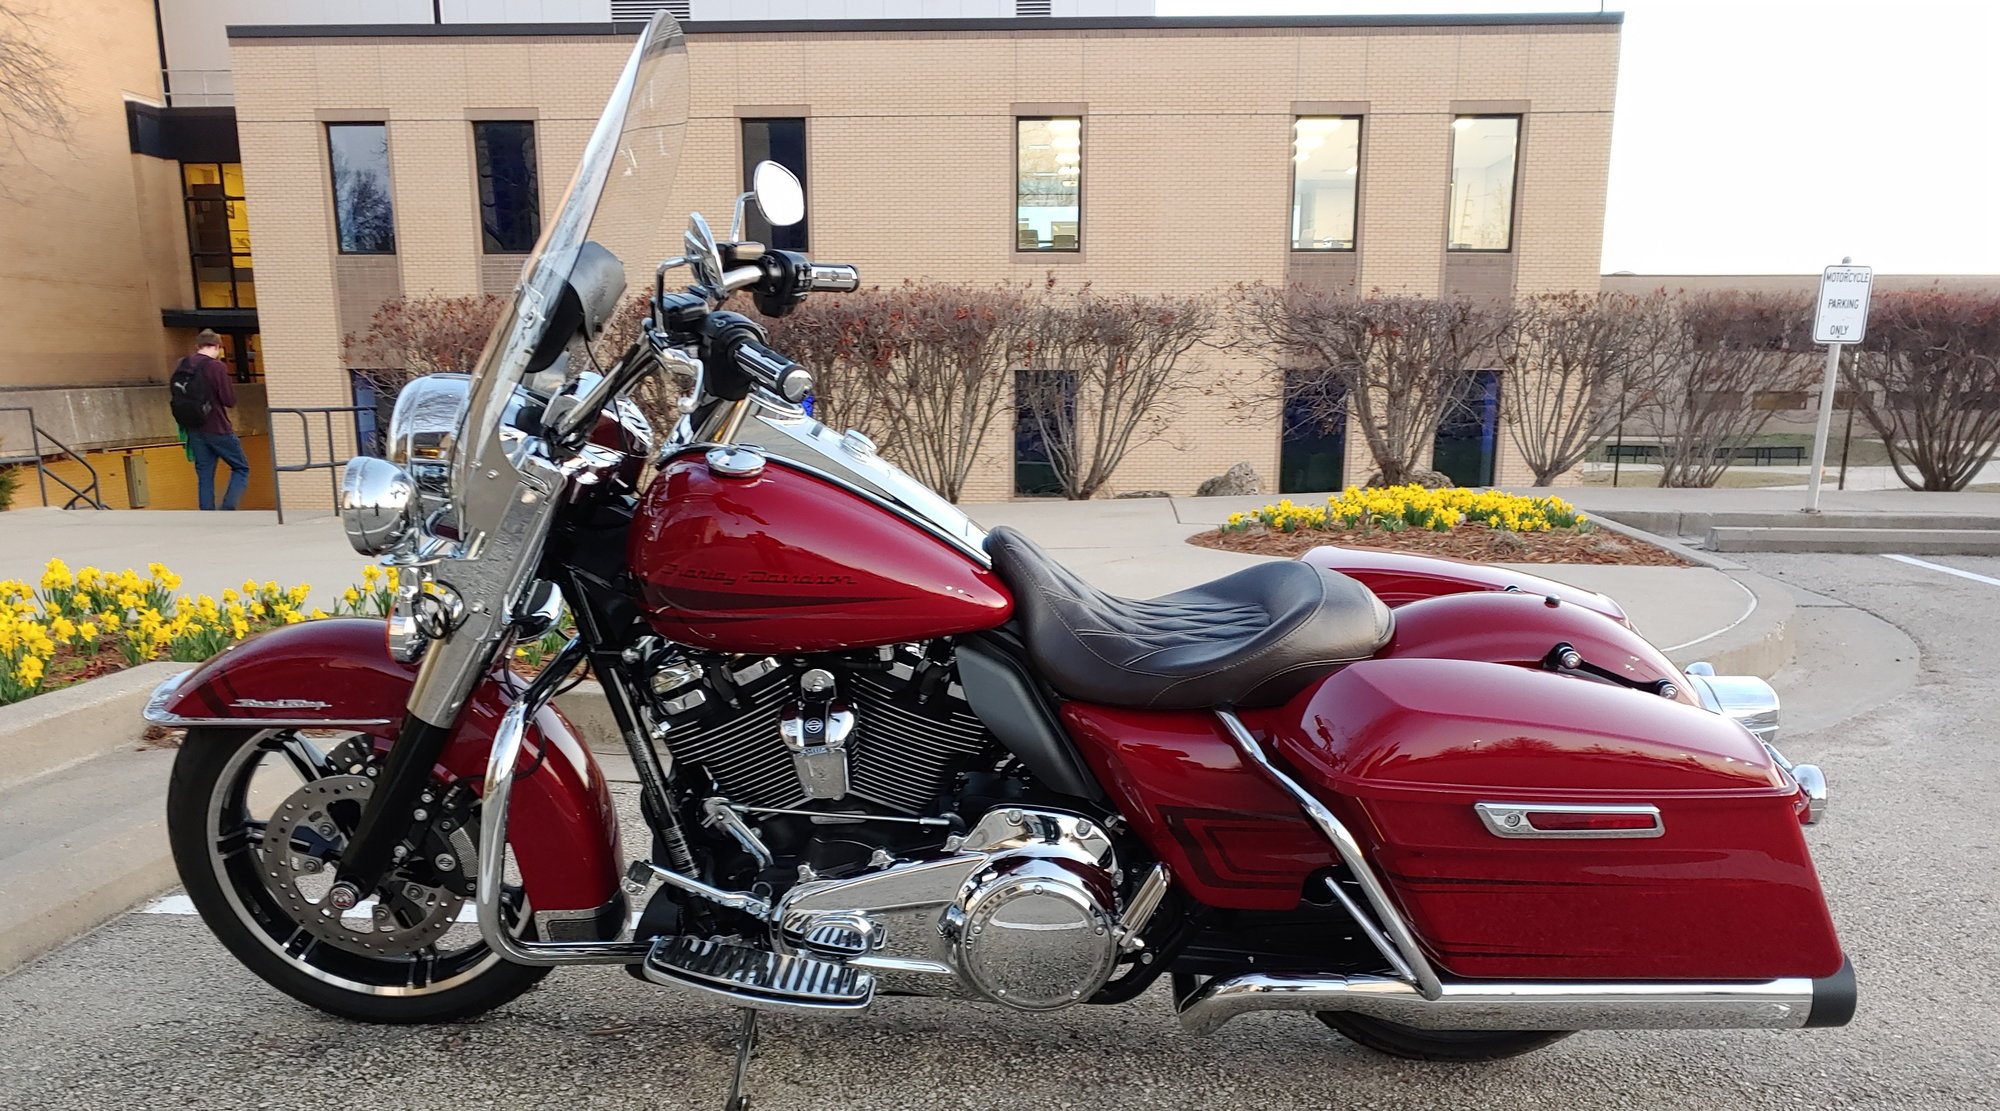 Indian Chieftain & Harley Road King Stage 2 Roll on - Harley Davidson Forums